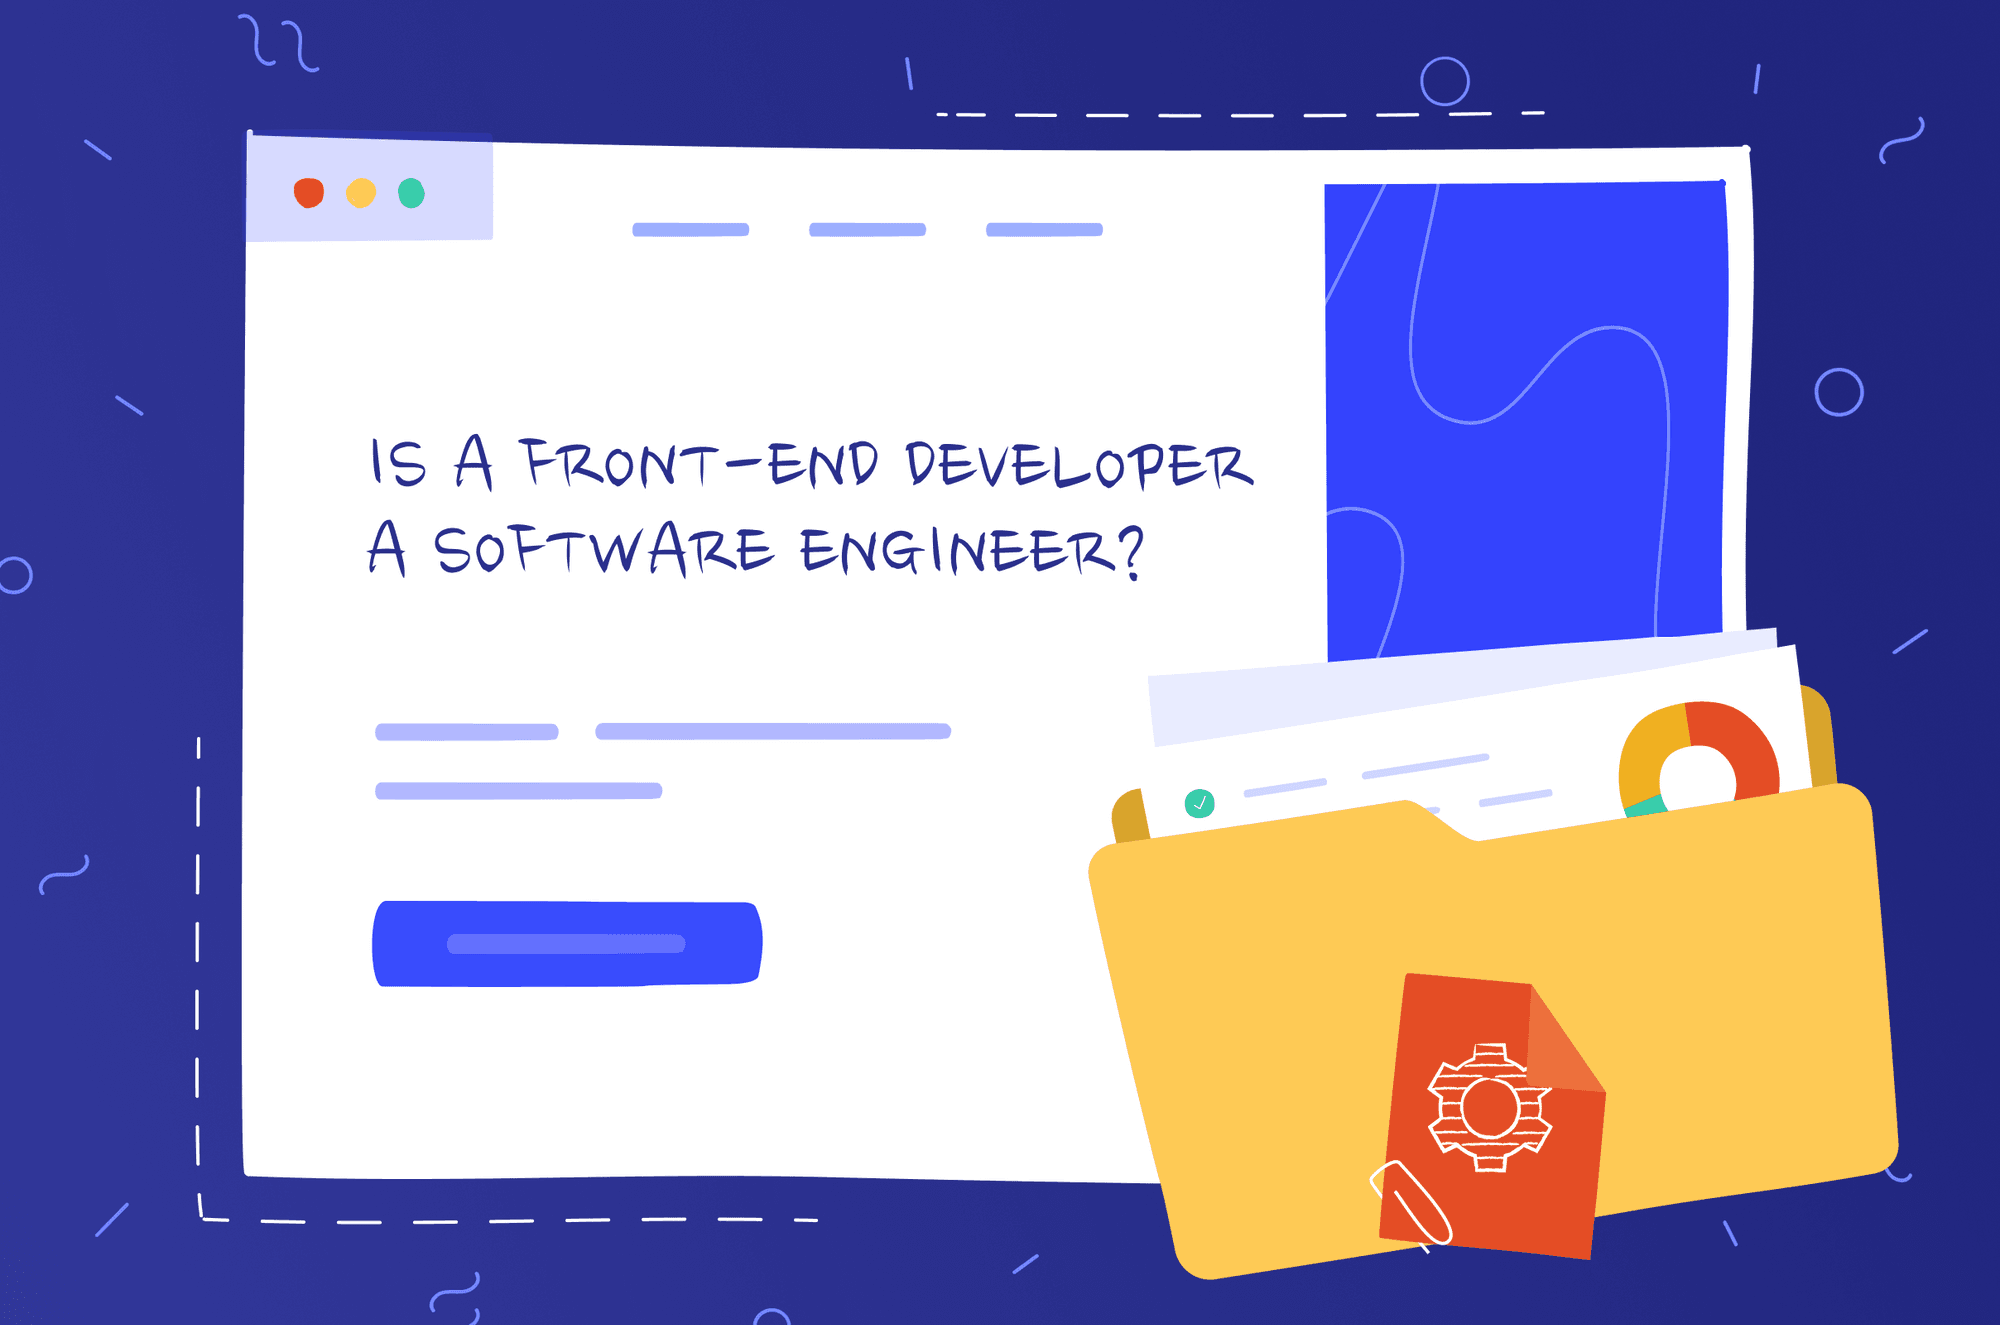 Is a front-end developer a software engineer?